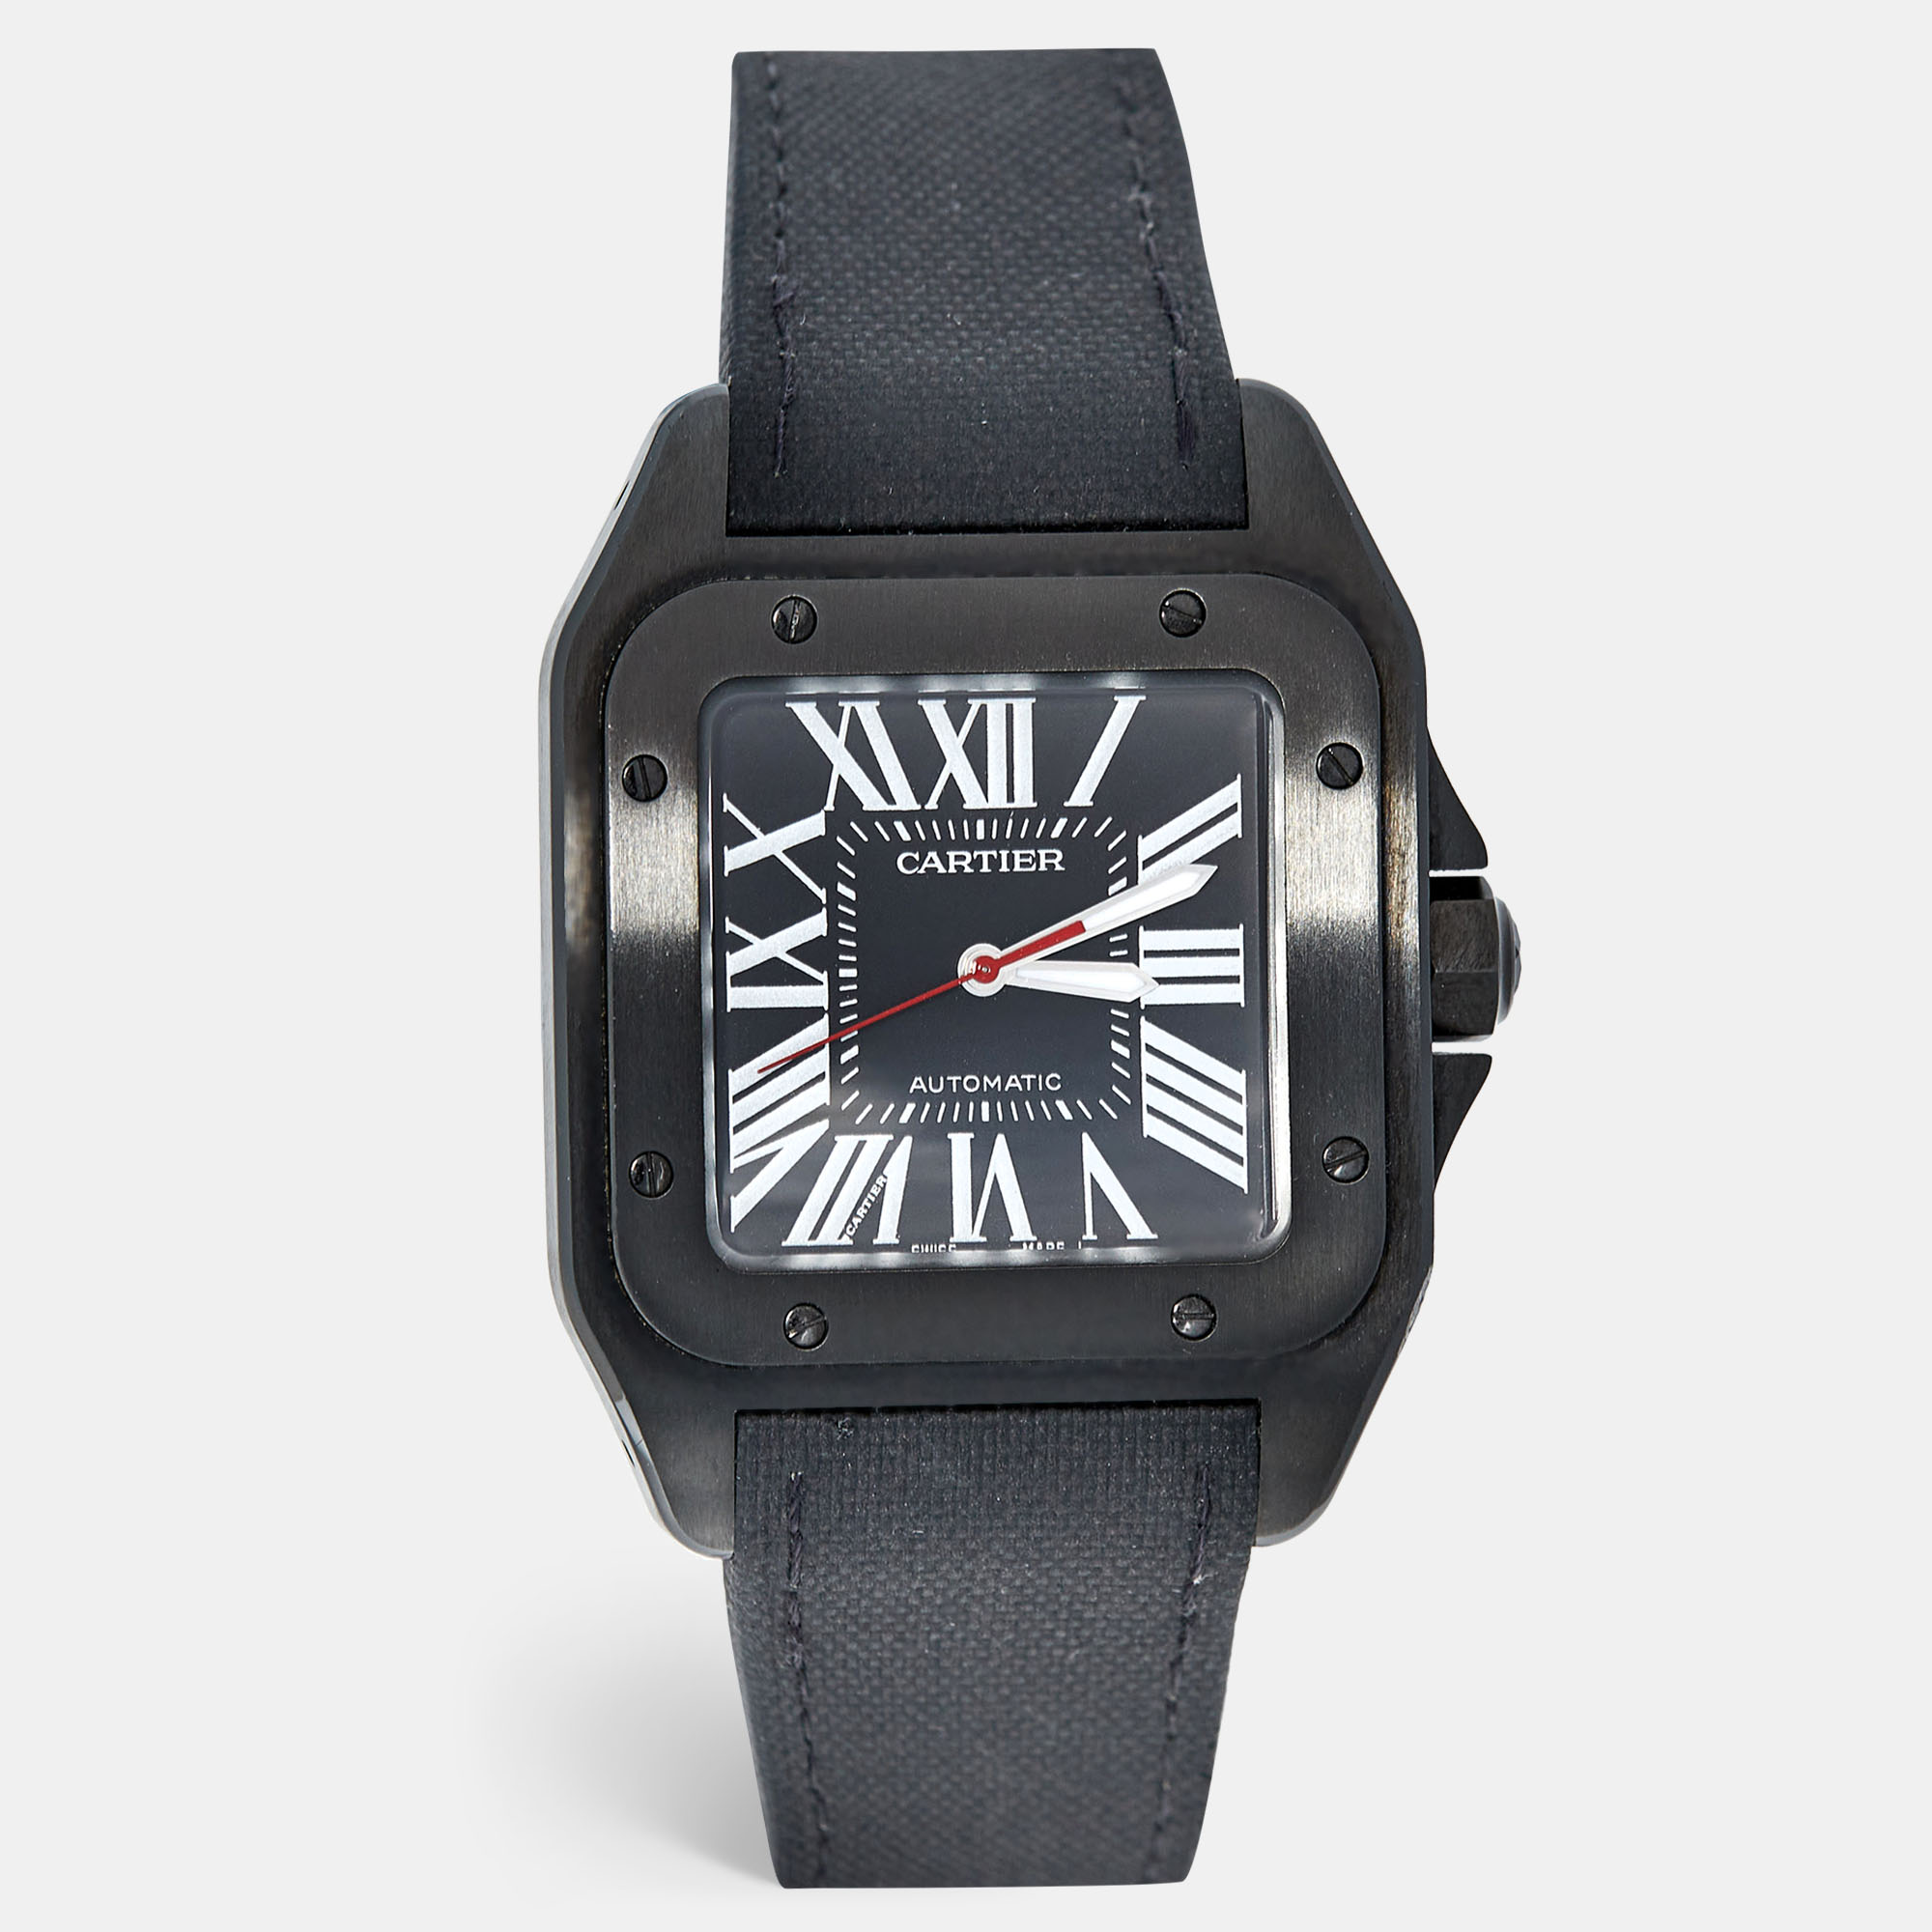 Pre-owned Cartier 100 Carbon Automatic Large Model Wssa0006 51.1 Mm X 41.3 Mm Watch In Black